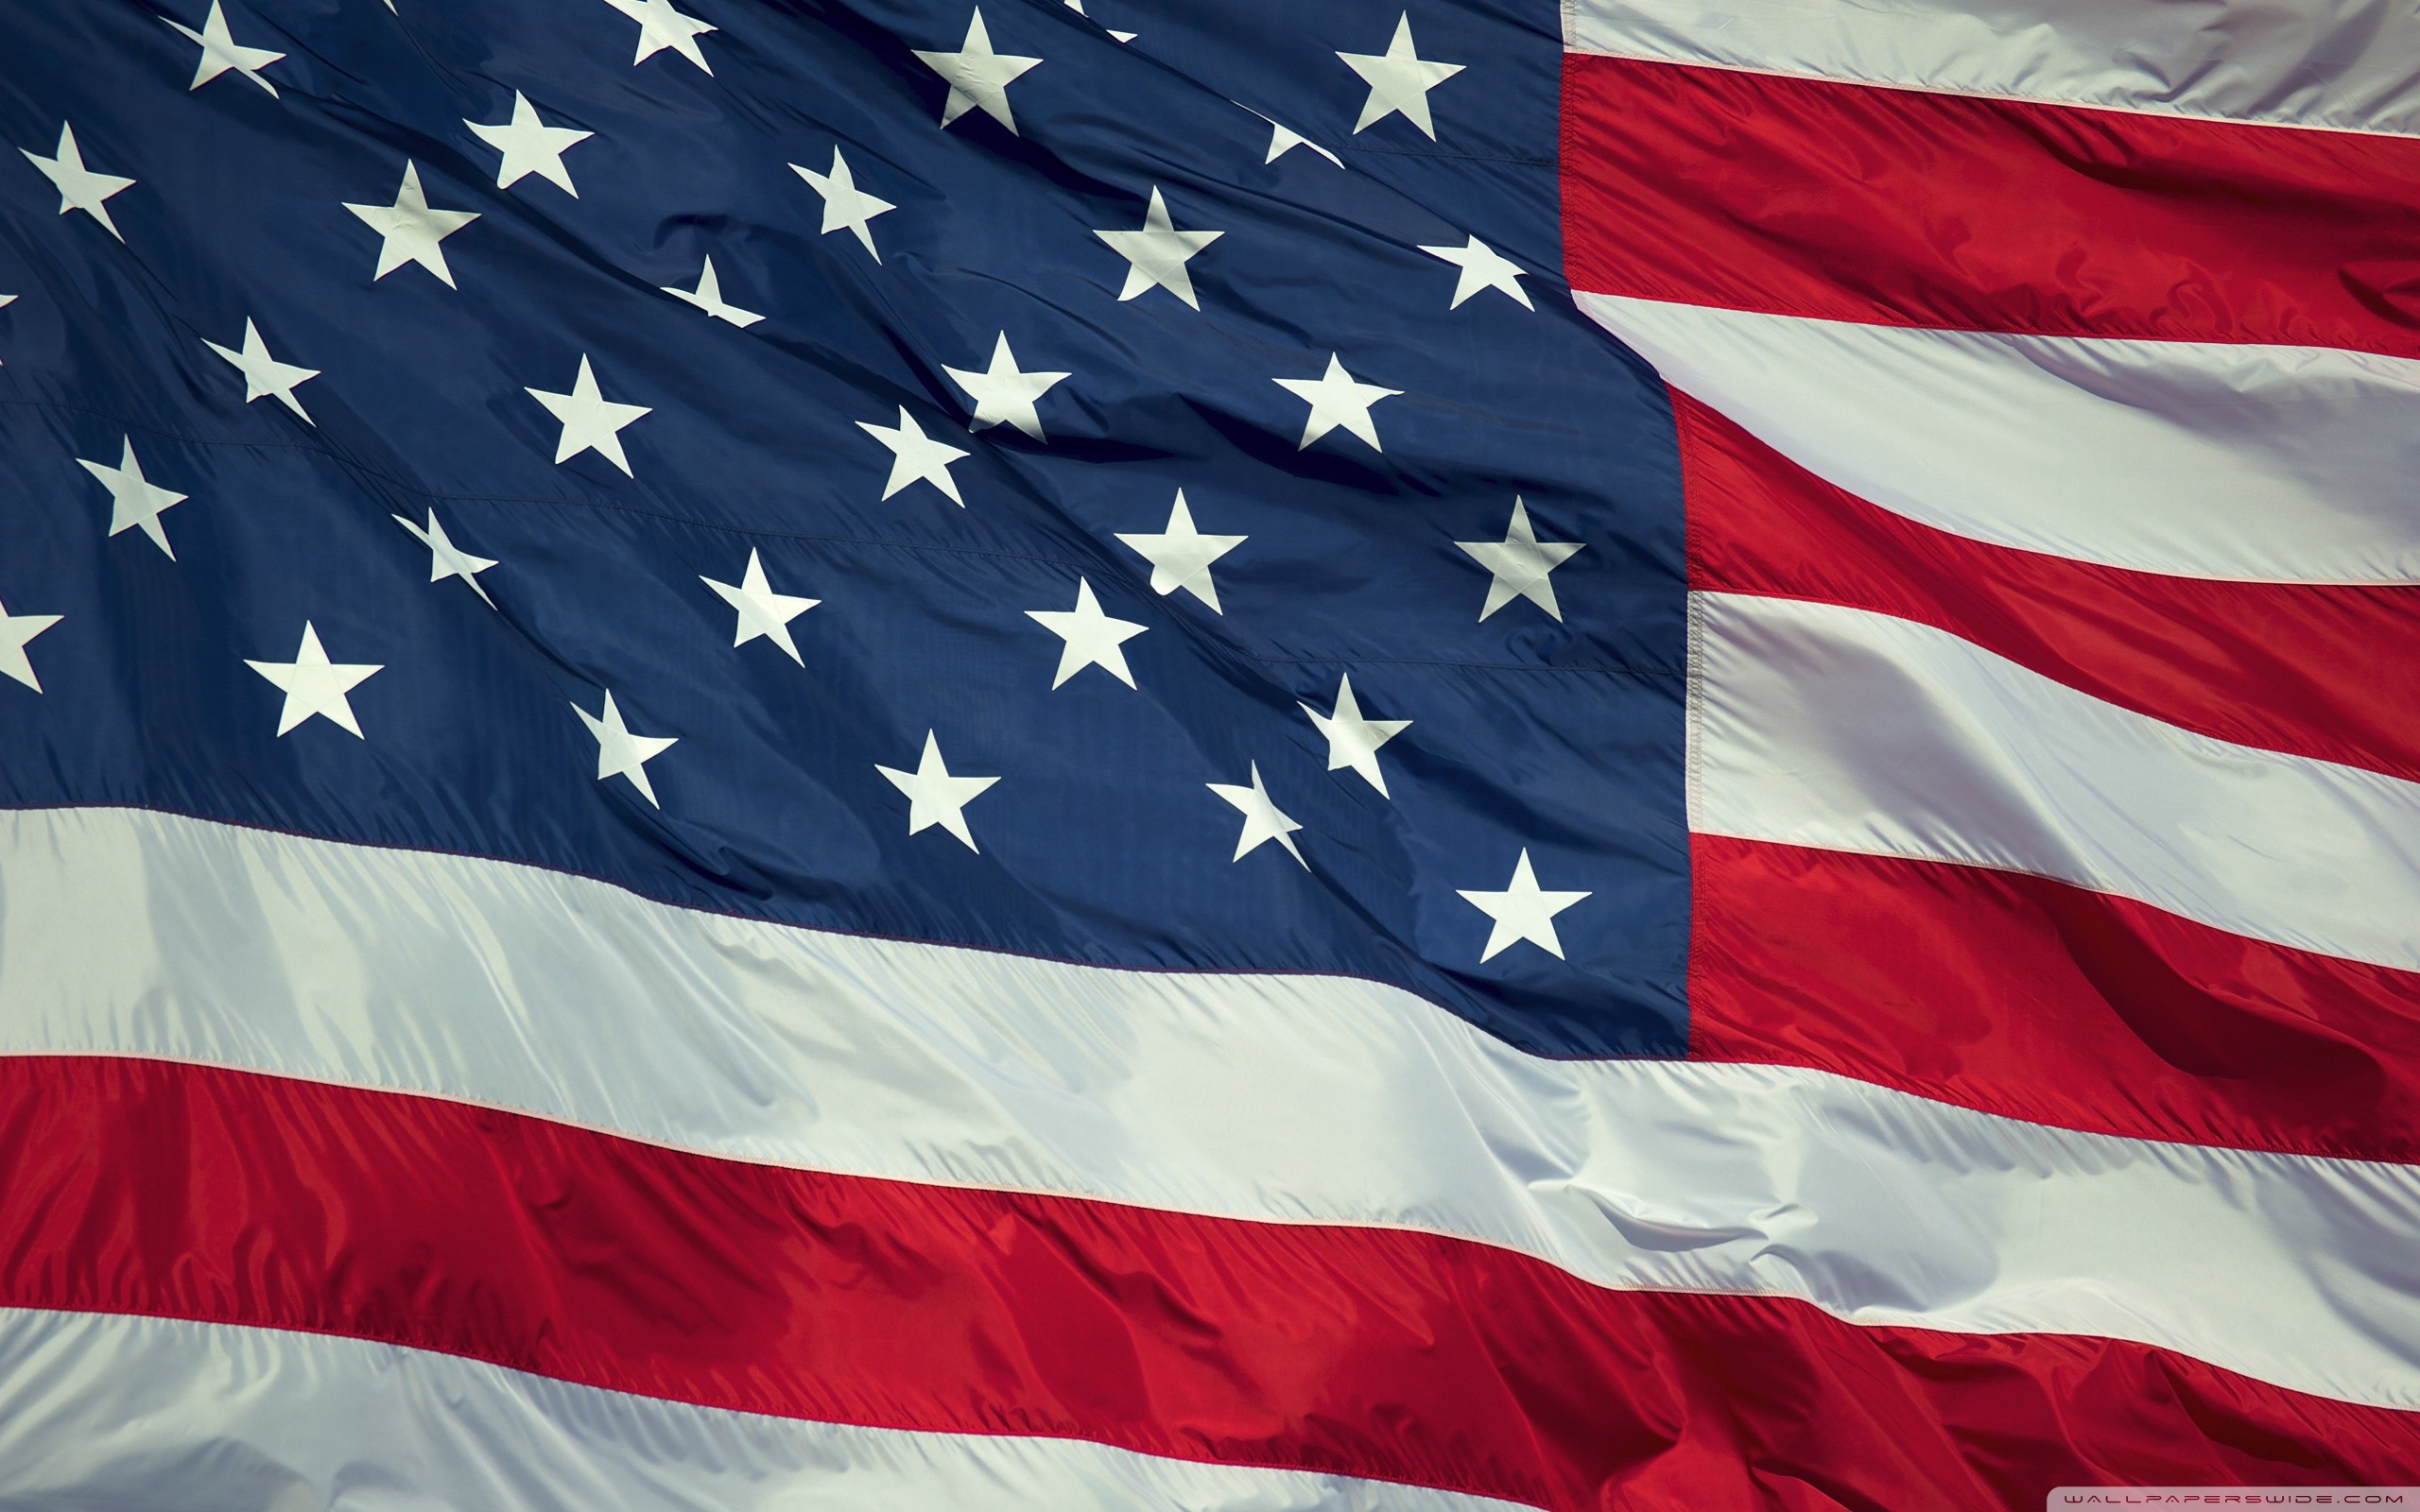 2560x1600 American Flag Wallpaper - Android Apps on Google Play ...